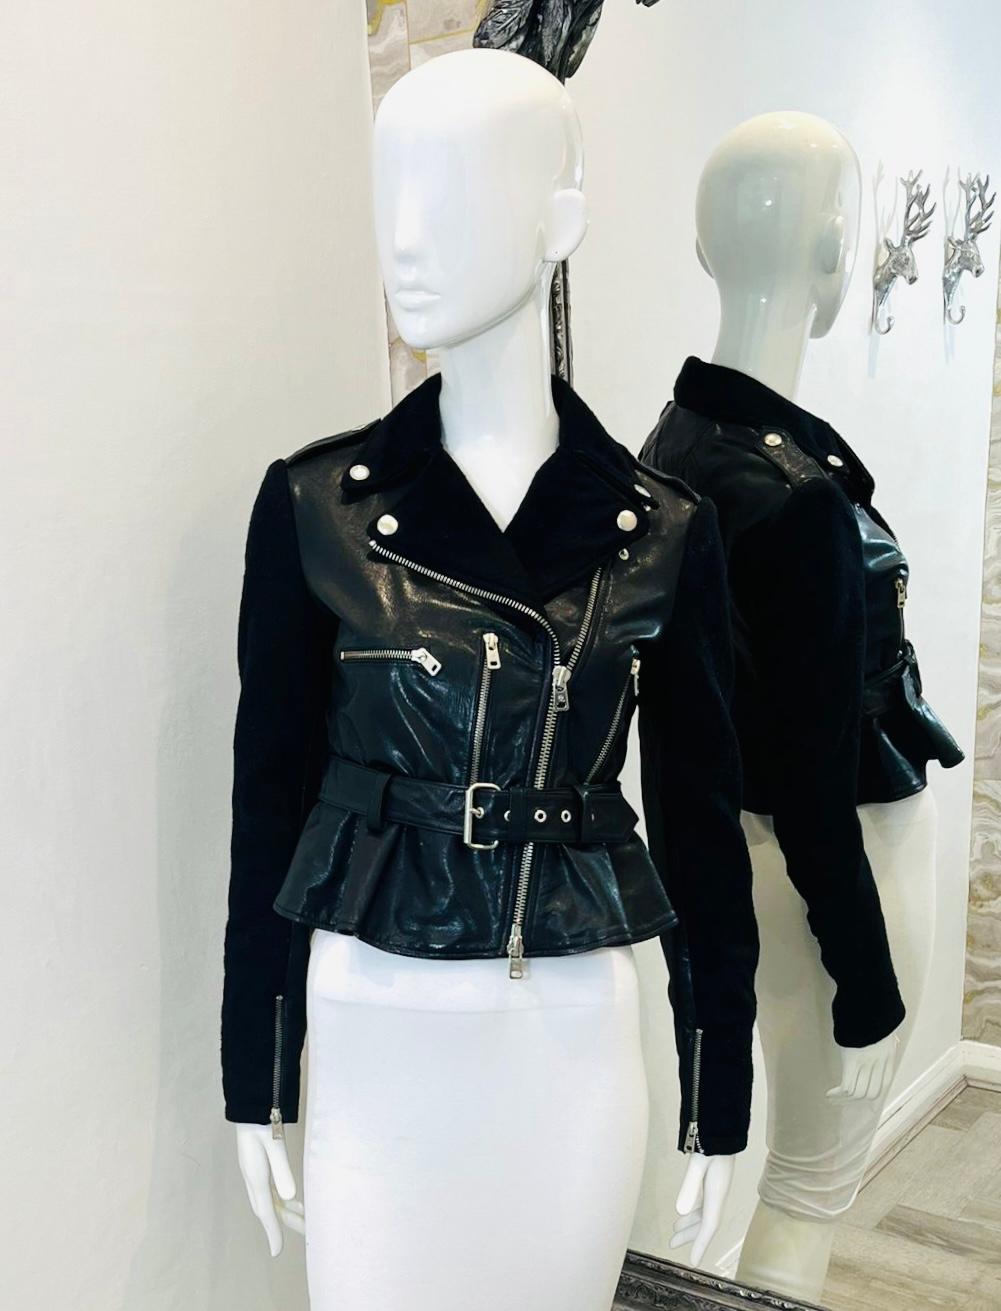 Alexander McQueen Cropped Peplum Leather & Wool Biker Jacket

Black biker jacket designed with peplum hem and belted waist.

Featuring cropped fit, asymmetric zip closure and three zipped pockets to the front.

Detailed with fabric long sleeves with